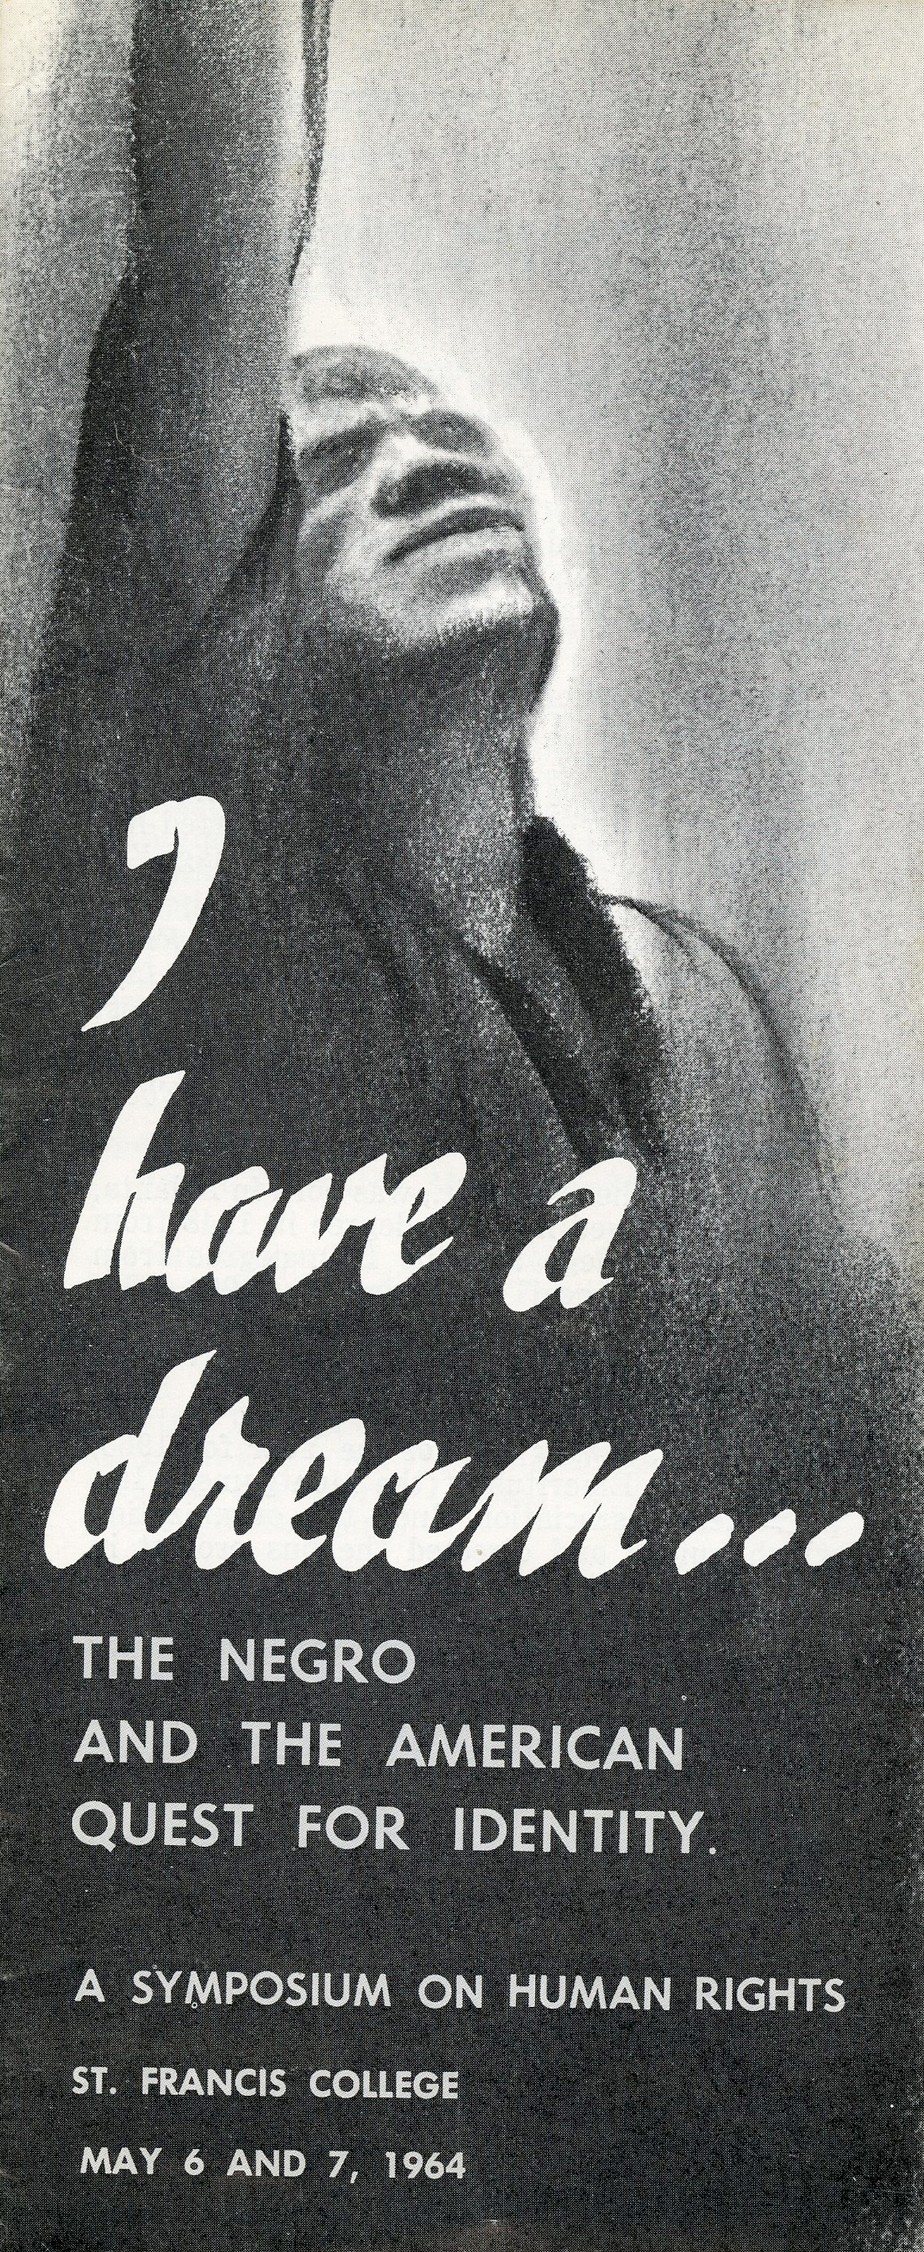 Cover of the 1964 Human Rights Symposium pamphlet